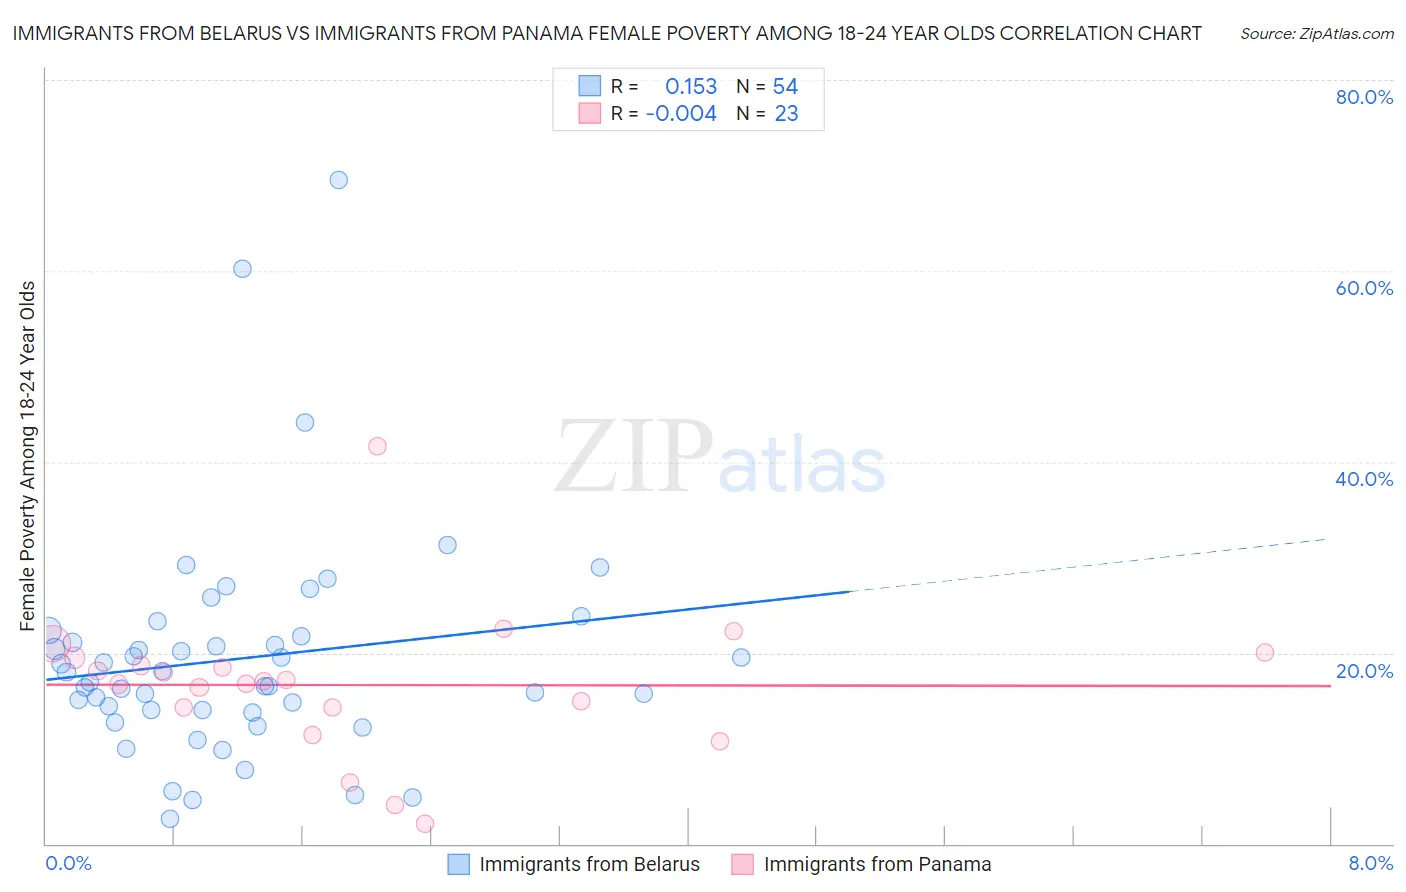 Immigrants from Belarus vs Immigrants from Panama Female Poverty Among 18-24 Year Olds